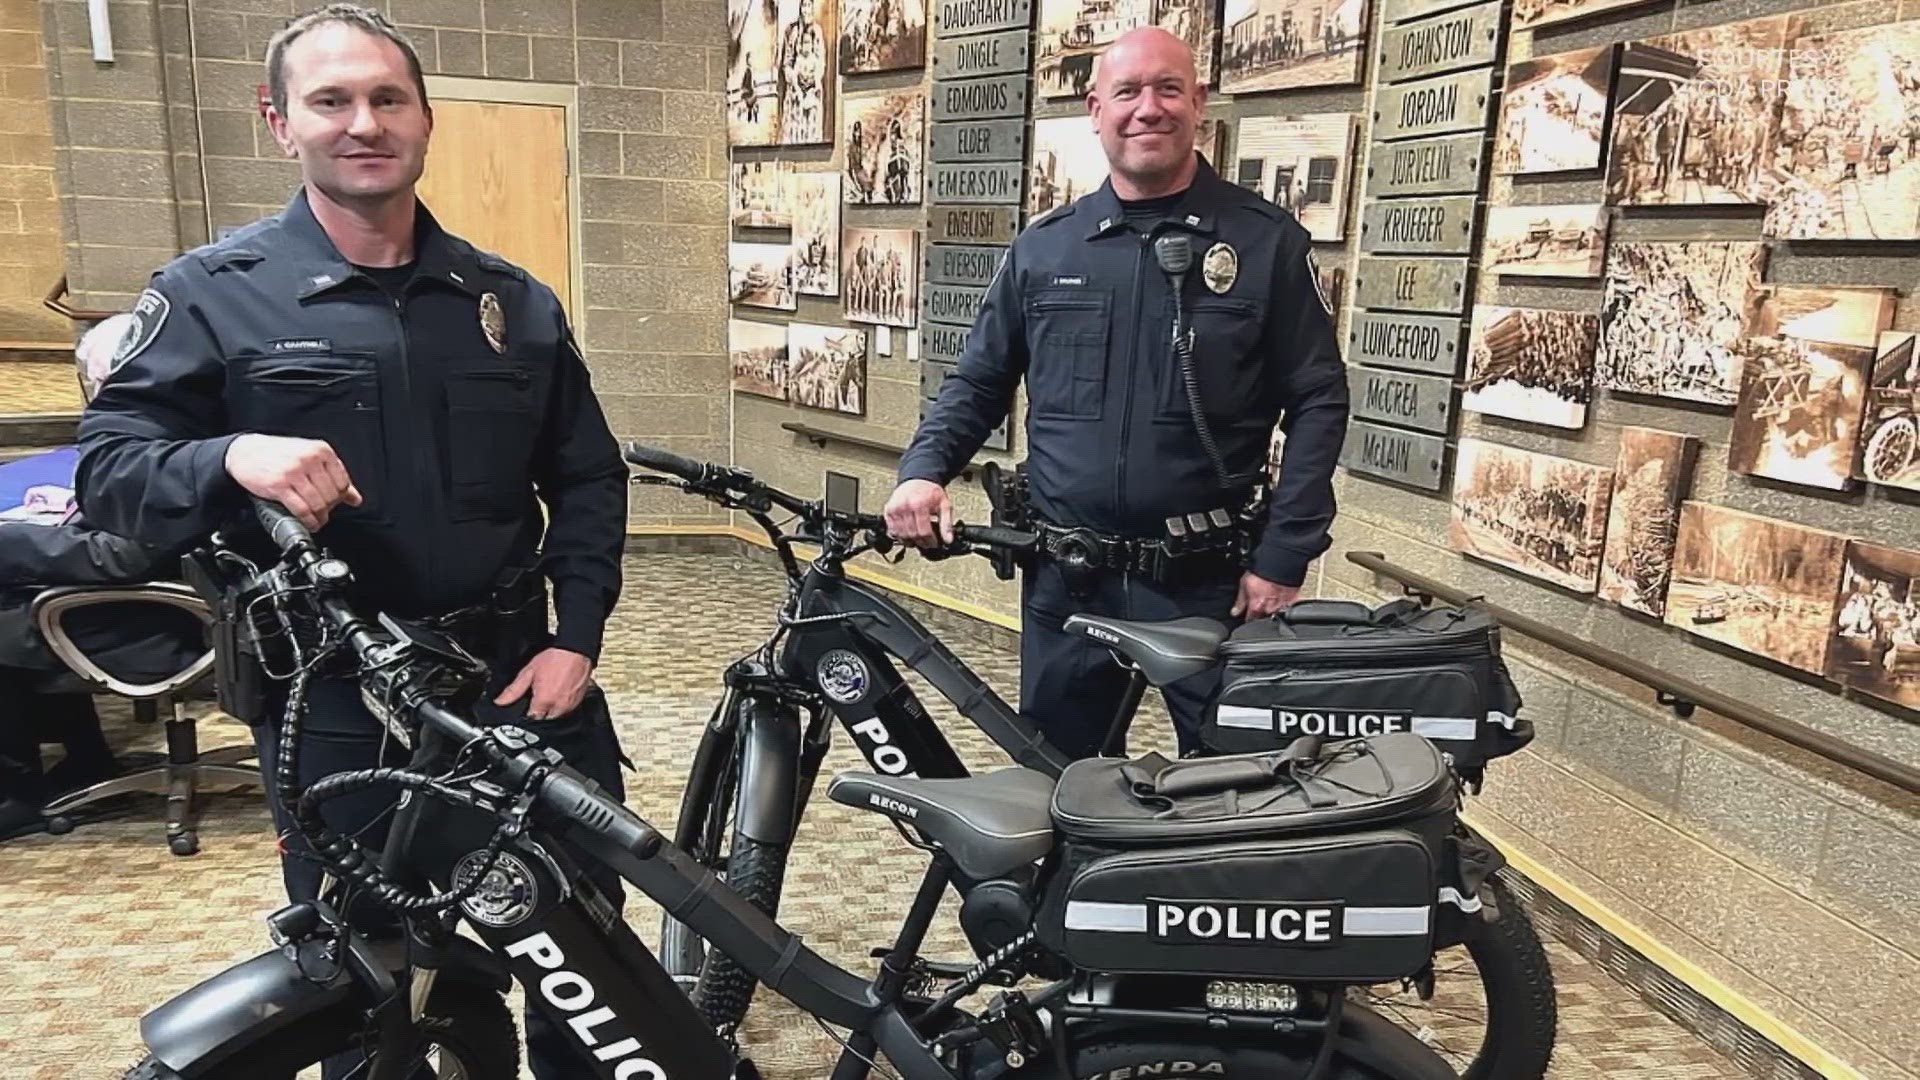 More law enforcement will soon be roaming the streets of downtown Coeur d'Alene on e-bikes.